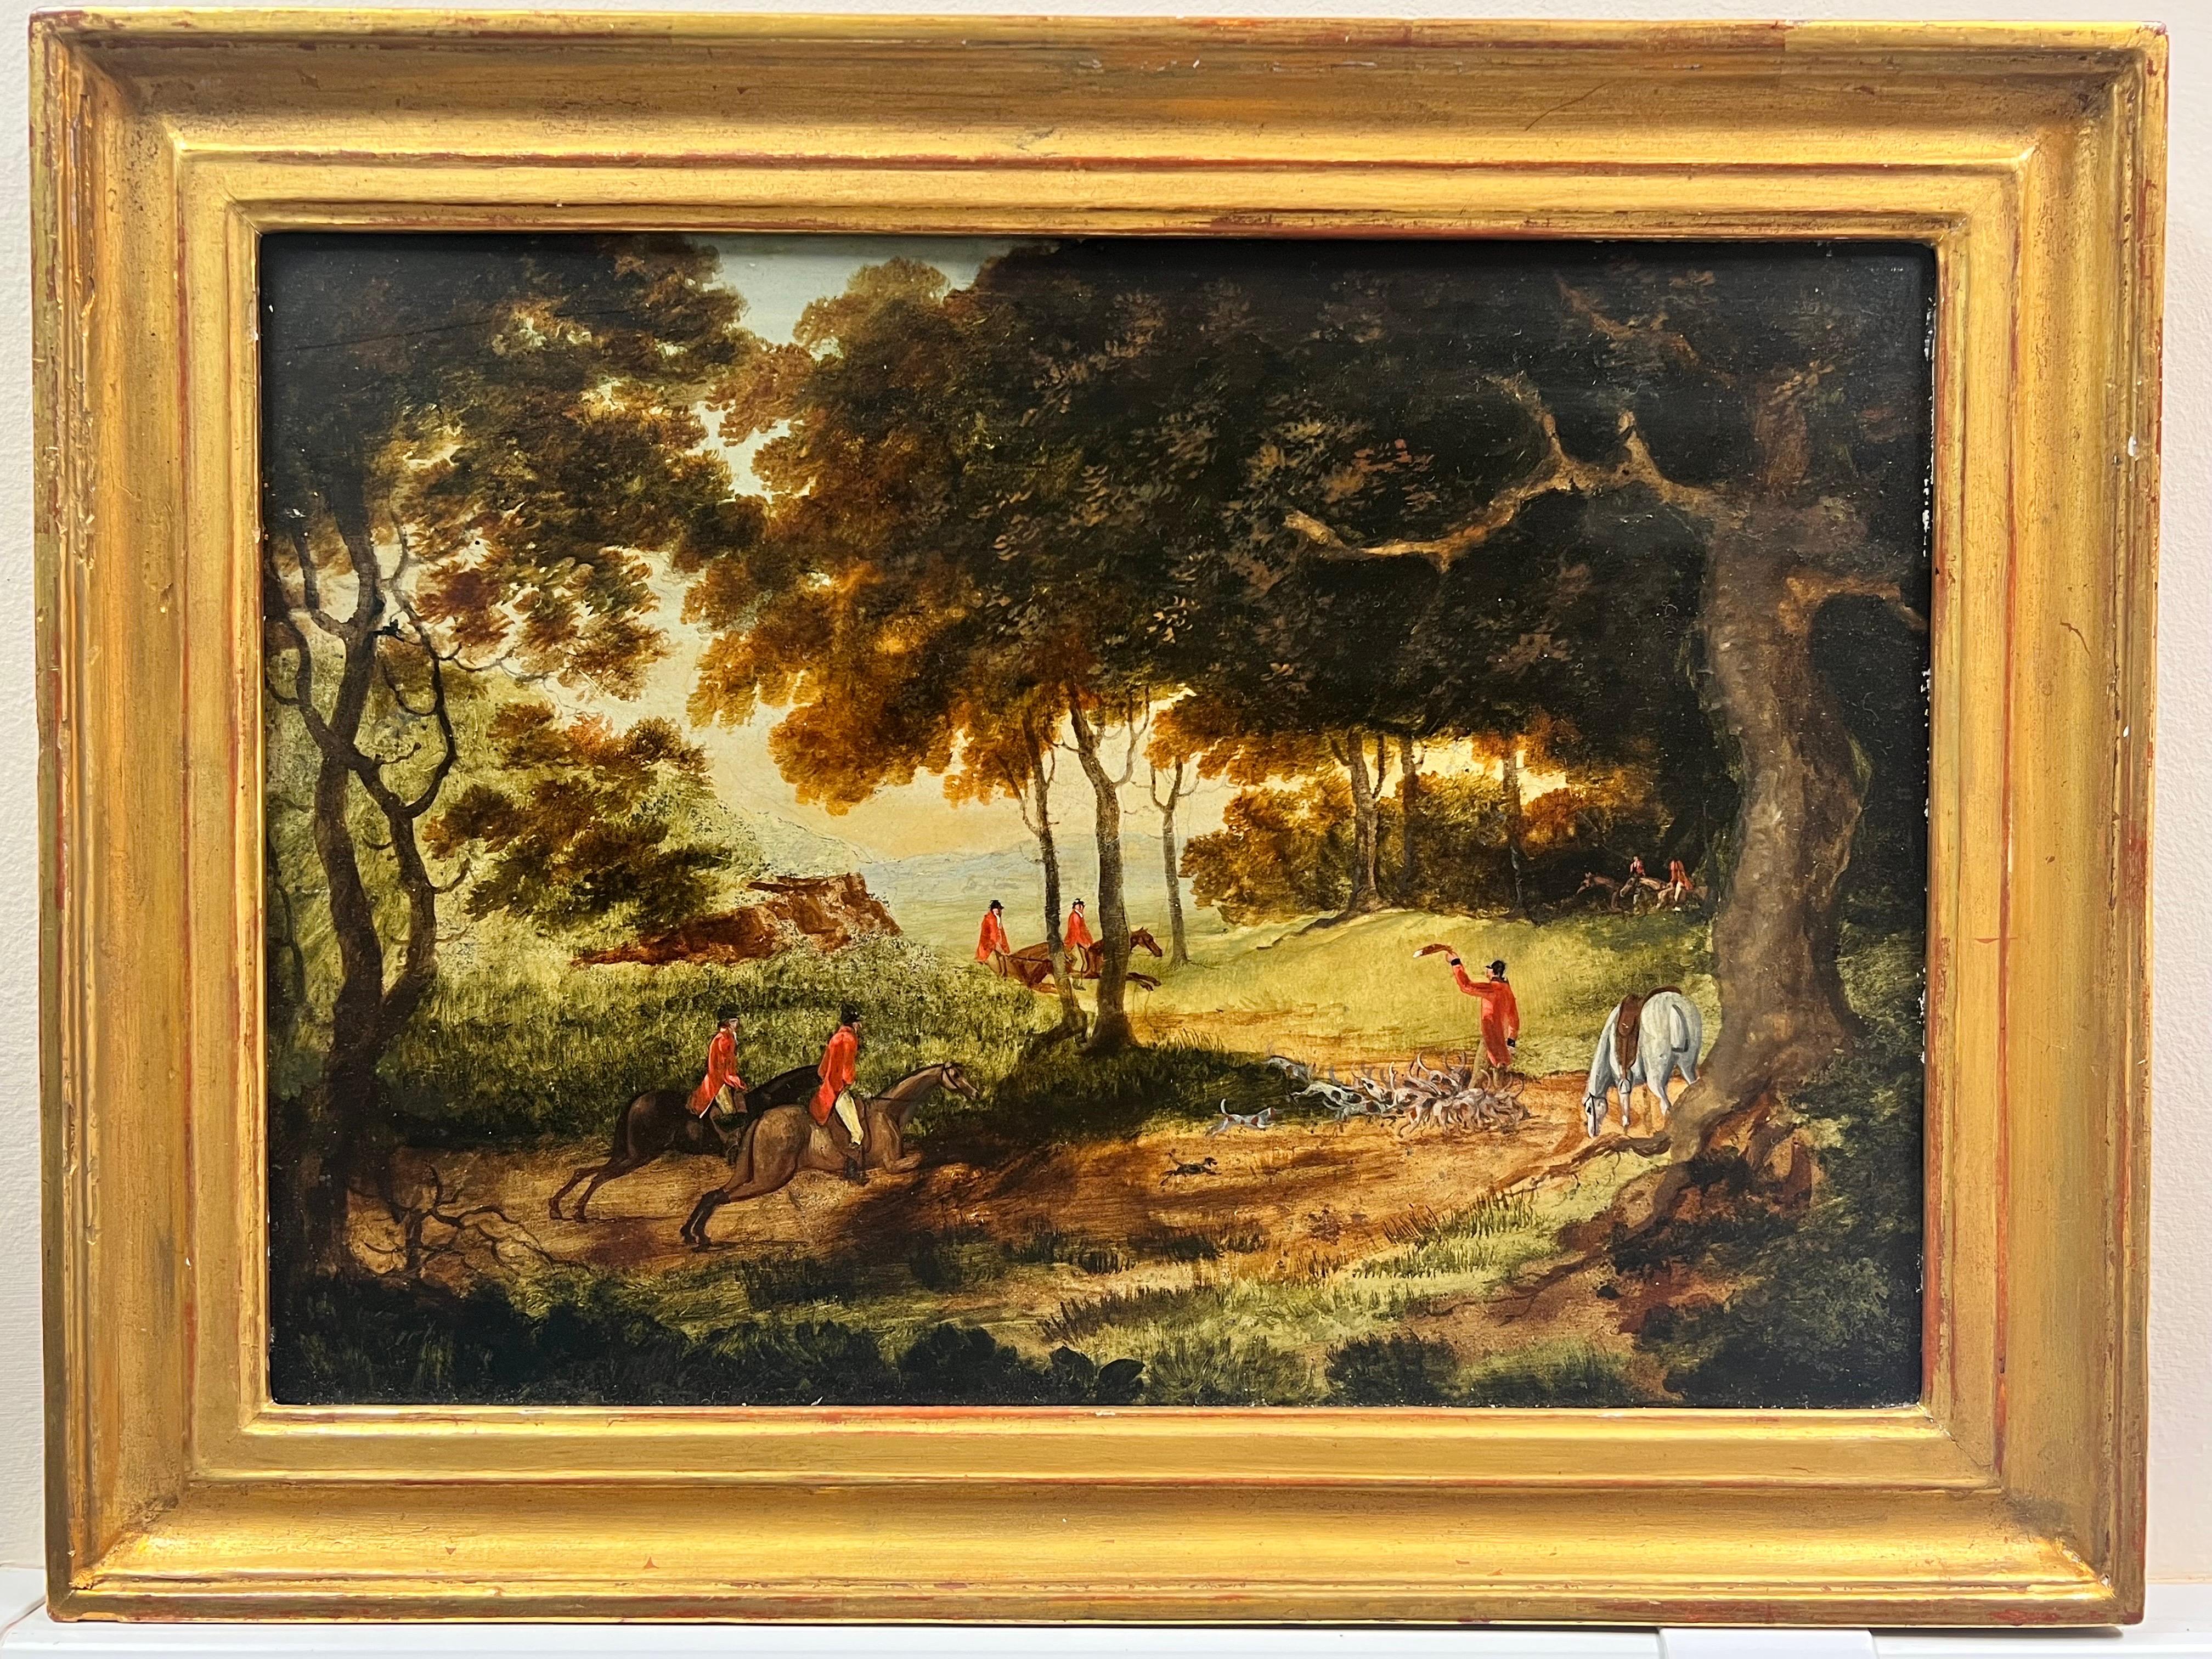 1850’s English Fox Hunting Scene Pack of Hounds, Huntsman & Horses in Woods - Painting by 19th Century English School